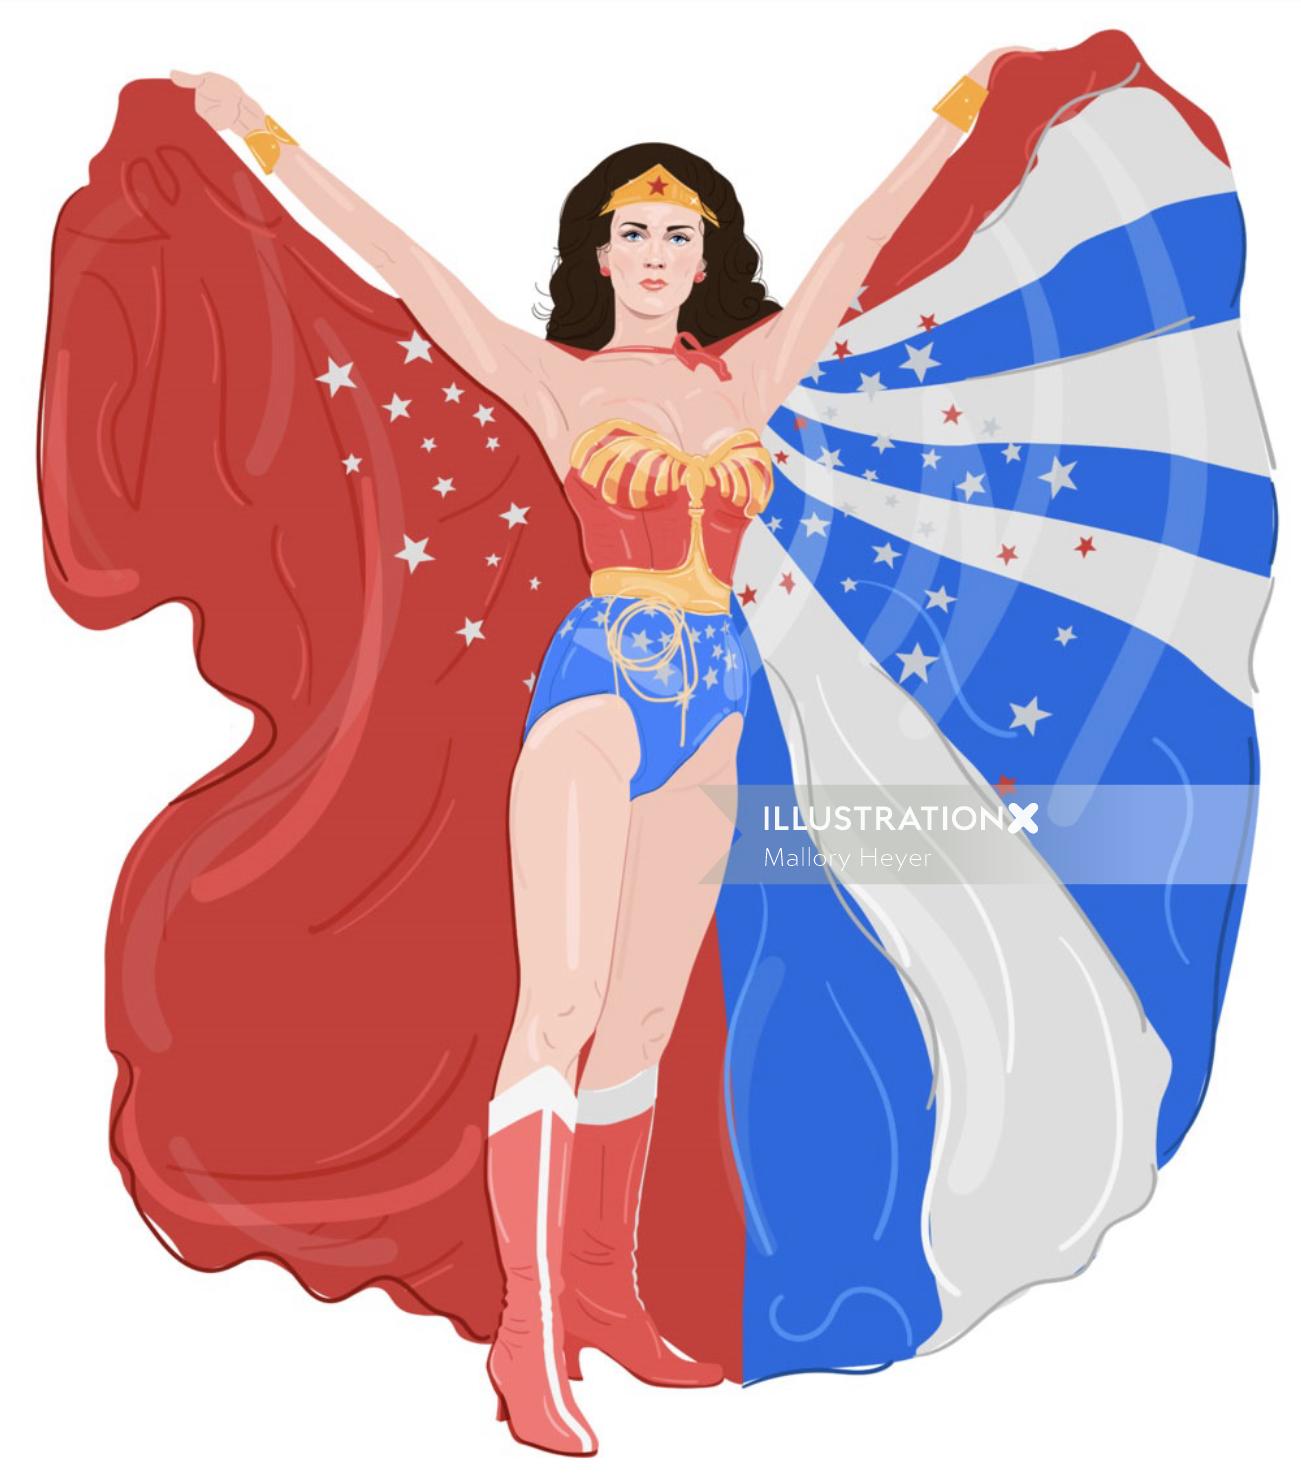 The amazing Wonder Woman illustration for Refinery29's 